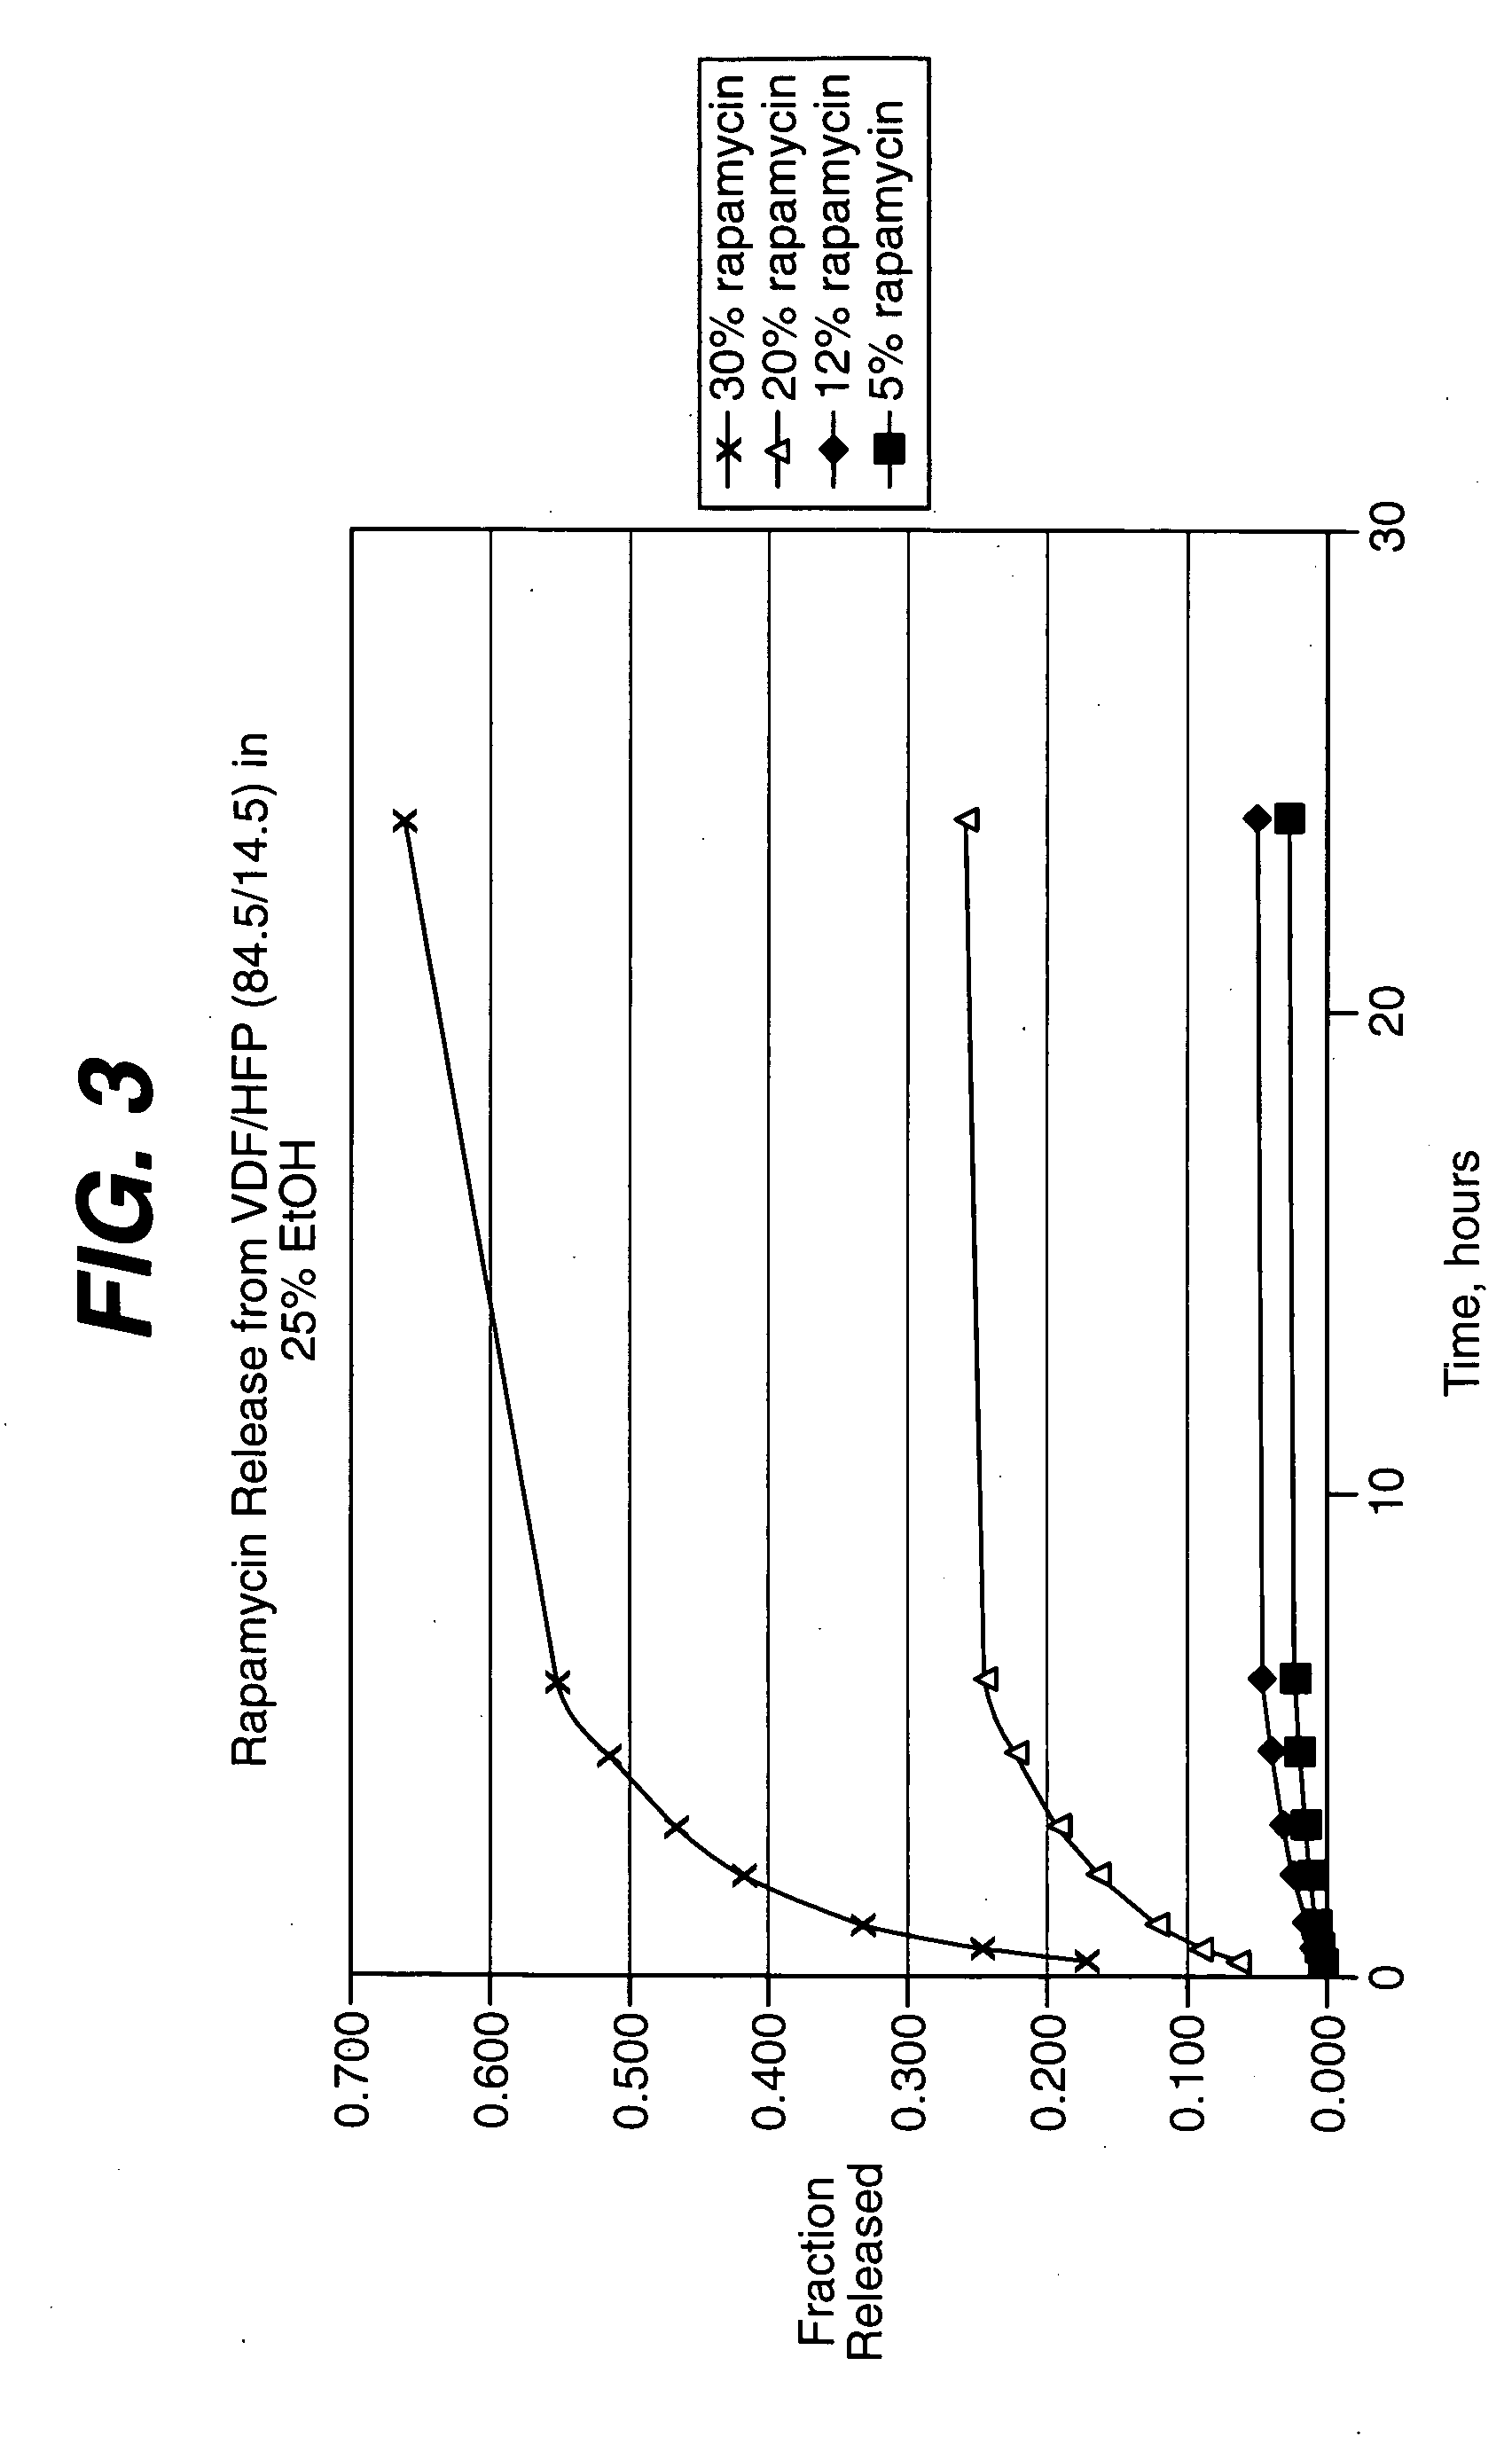 Intraluminal device and therapeutic agent combination for treating aneurysmal disease